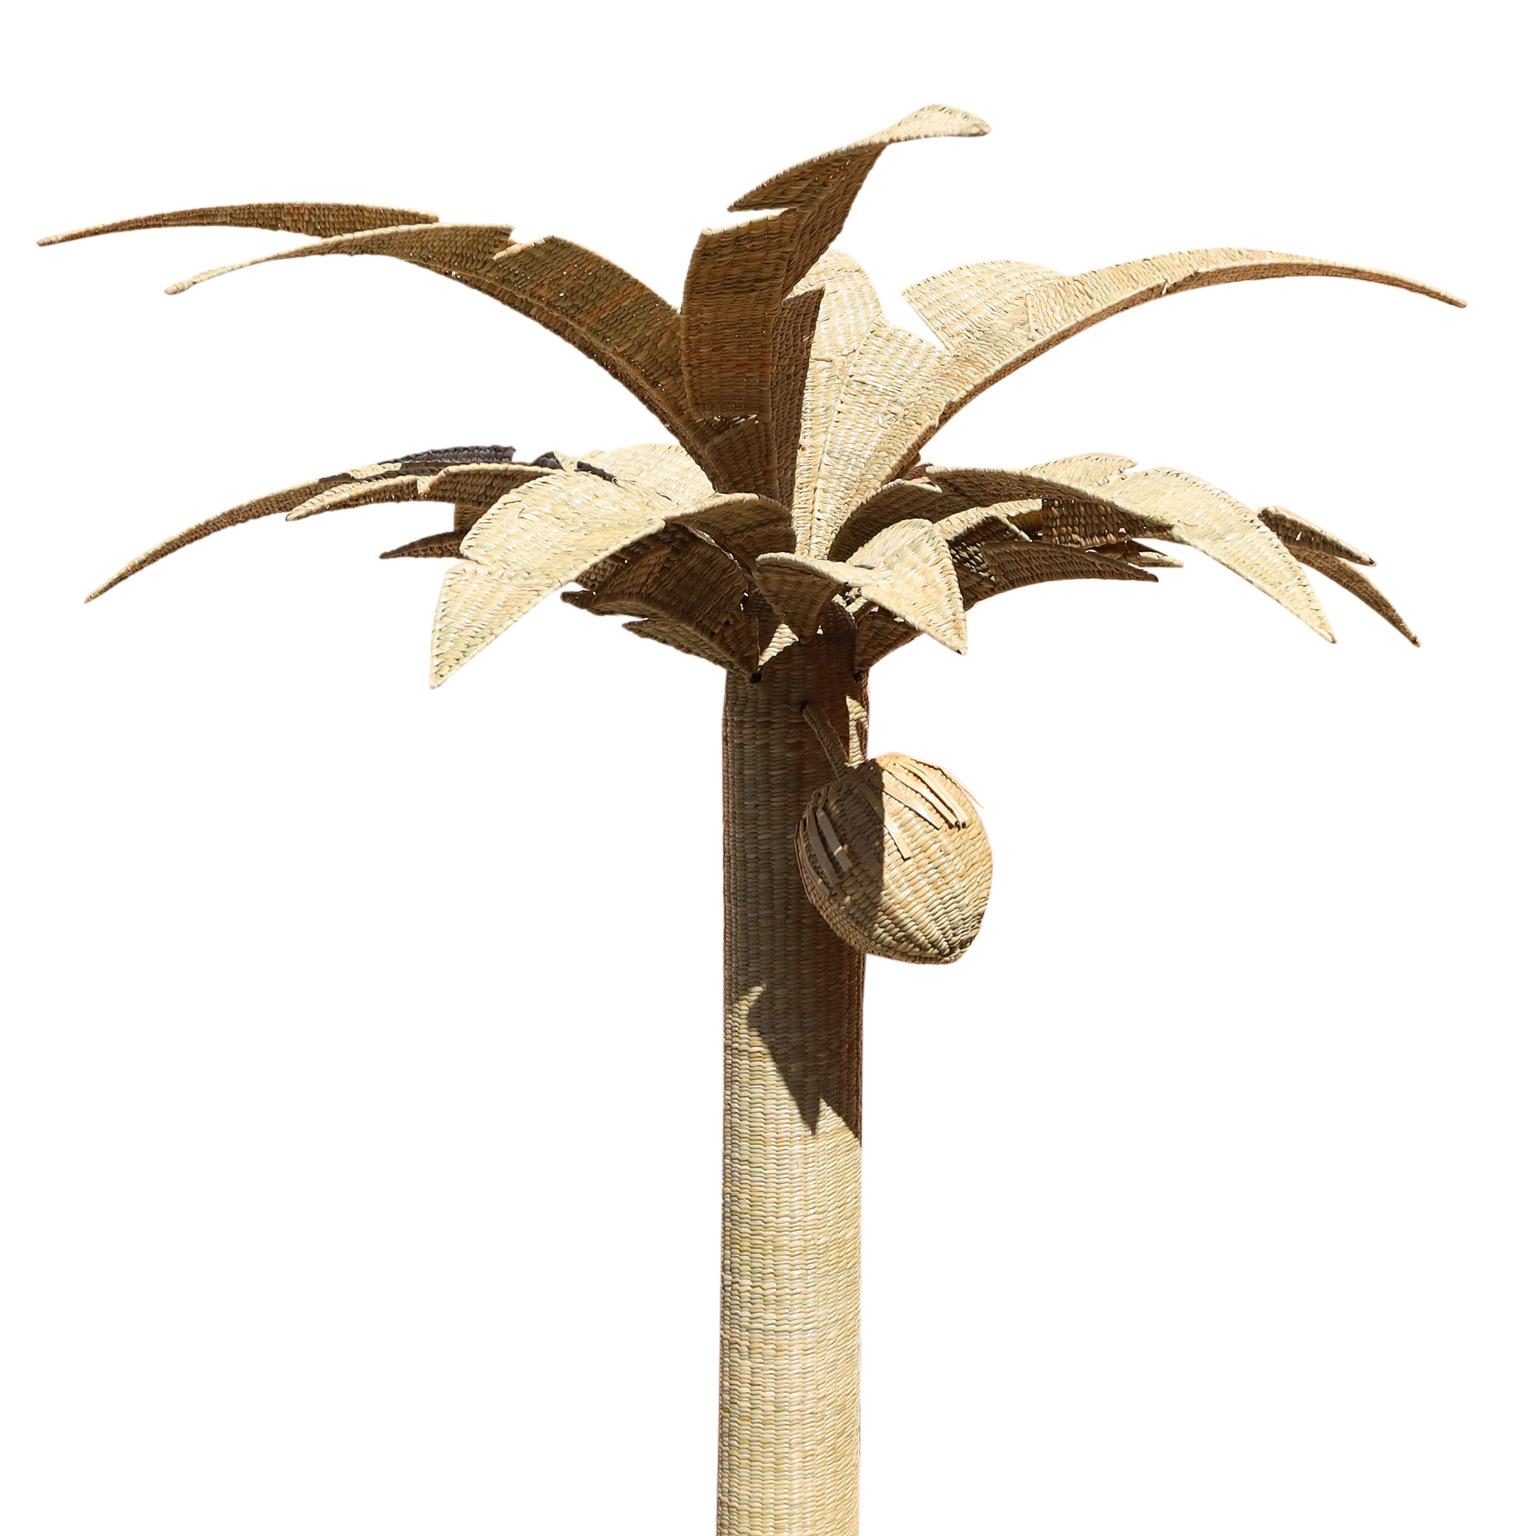 Life Size Wicker Palm Tree Sculpture from the FS Flores Collection For Sale 2